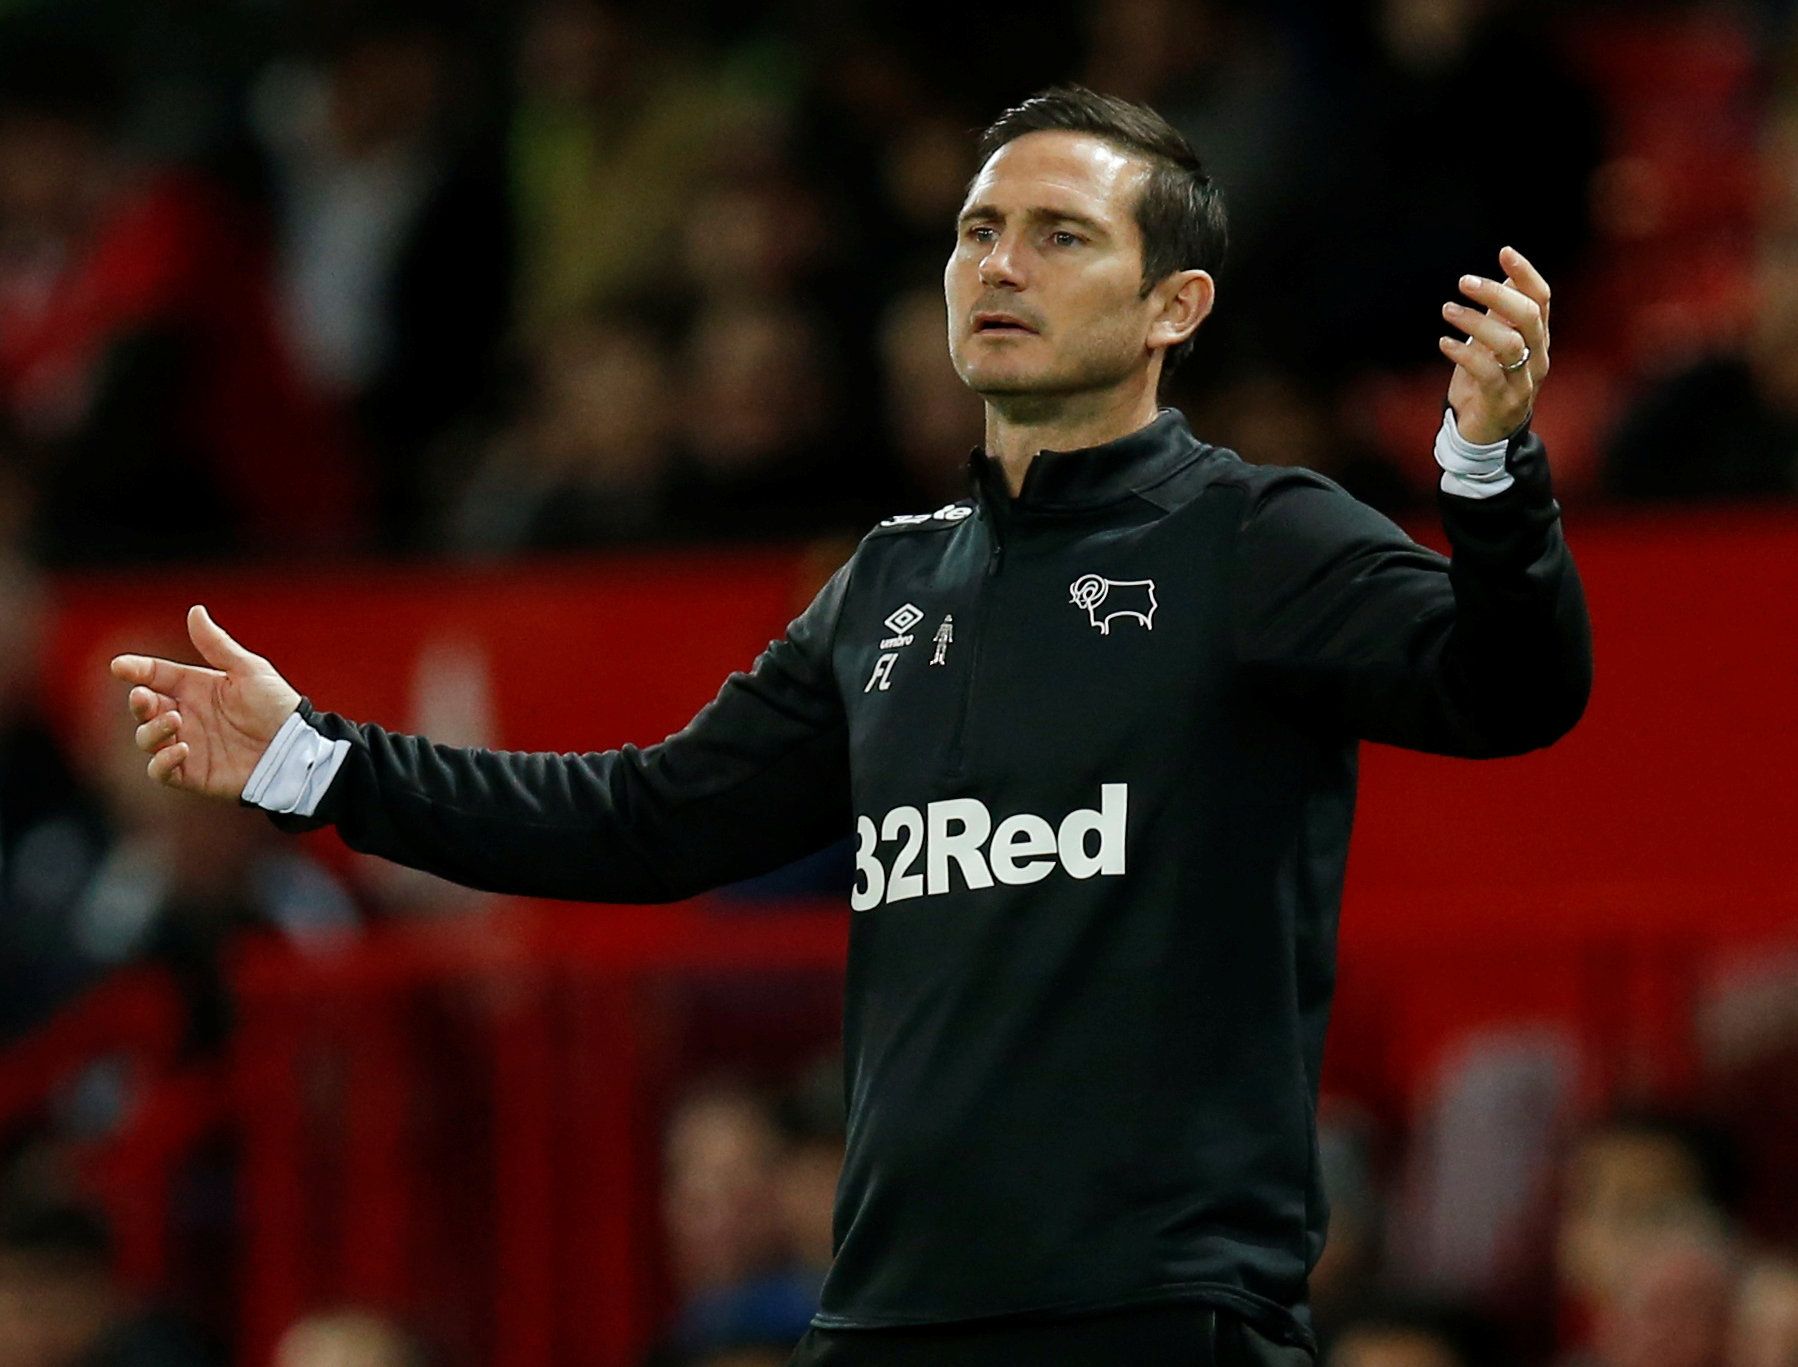 Soccer Football - Carabao Cup - Third Round - Manchester United v Derby County - Old Trafford, Manchester, Britain - September 25, 2018  Derby County manager Frank Lampard   REUTERS/Andrew Yates  EDITORIAL USE ONLY. No use with unauthorized audio, video, data, fixture lists, club/league logos or 